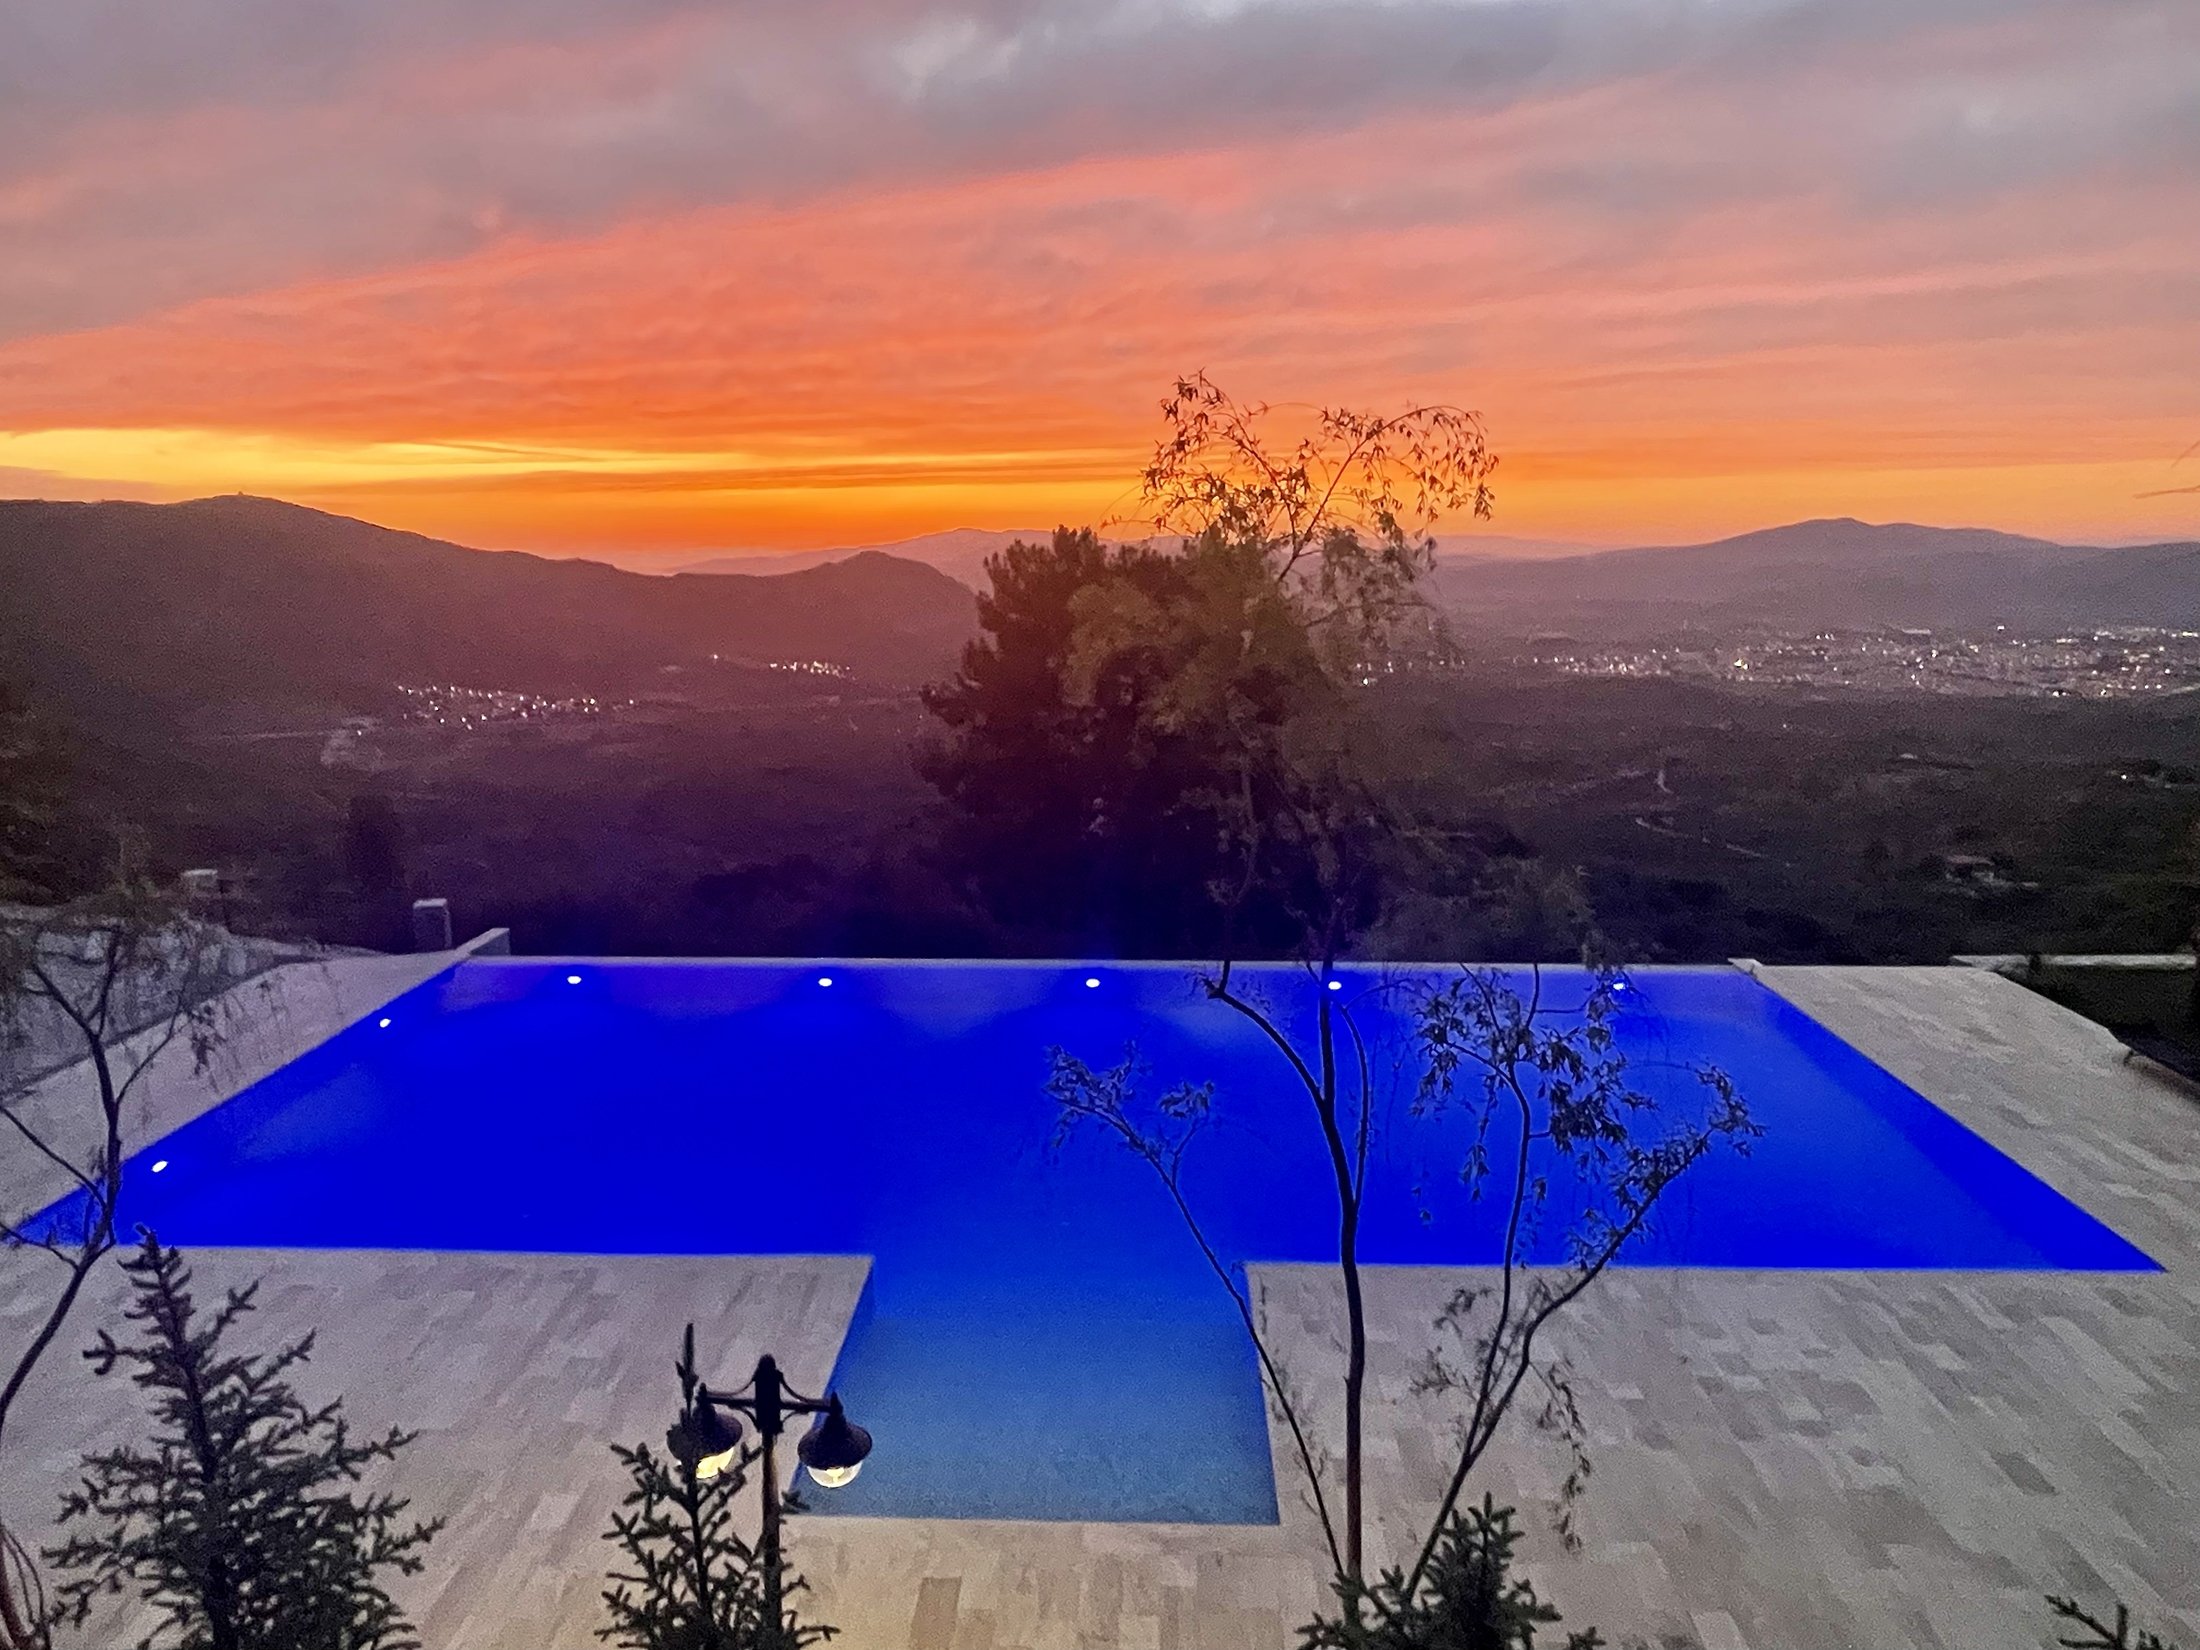 A view of a pool at the Ephesus Retreat Center, in Izmir, Türkiye, July 2, 2023. (Photo by Leyla Yvonne Ergil)